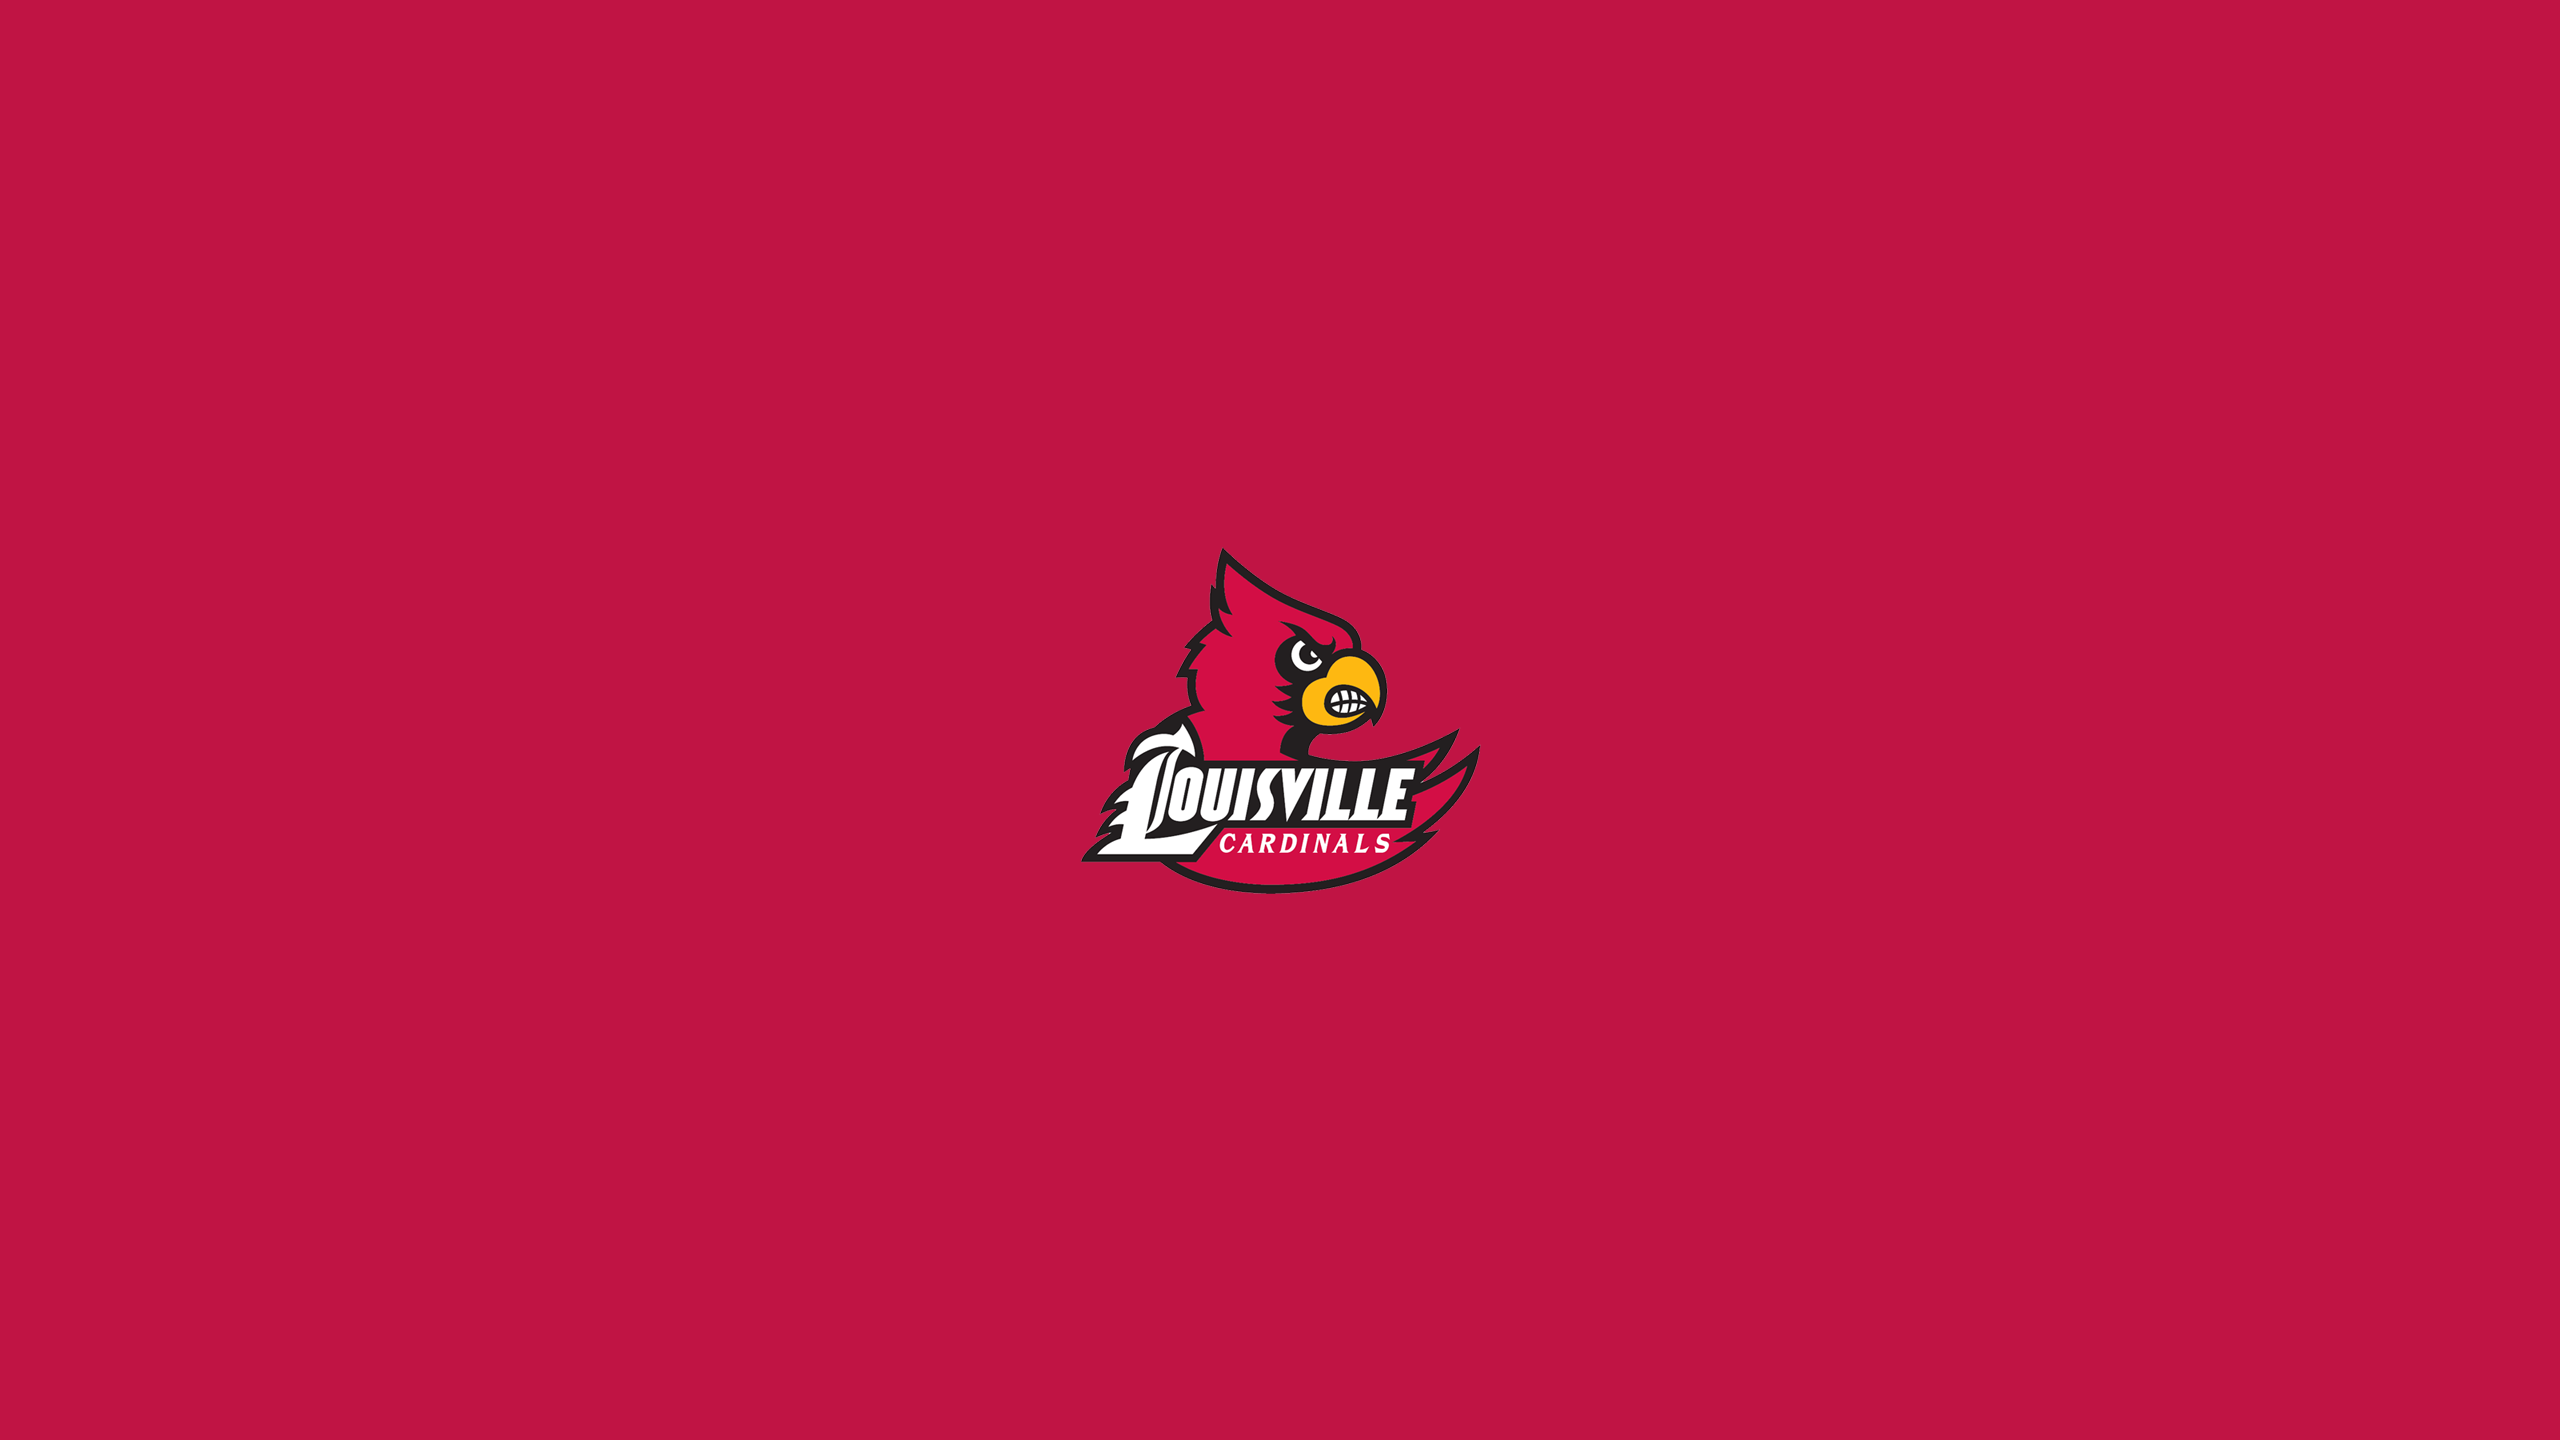 Louisville Cardinals Basketball - NCAAB - Square Bettor